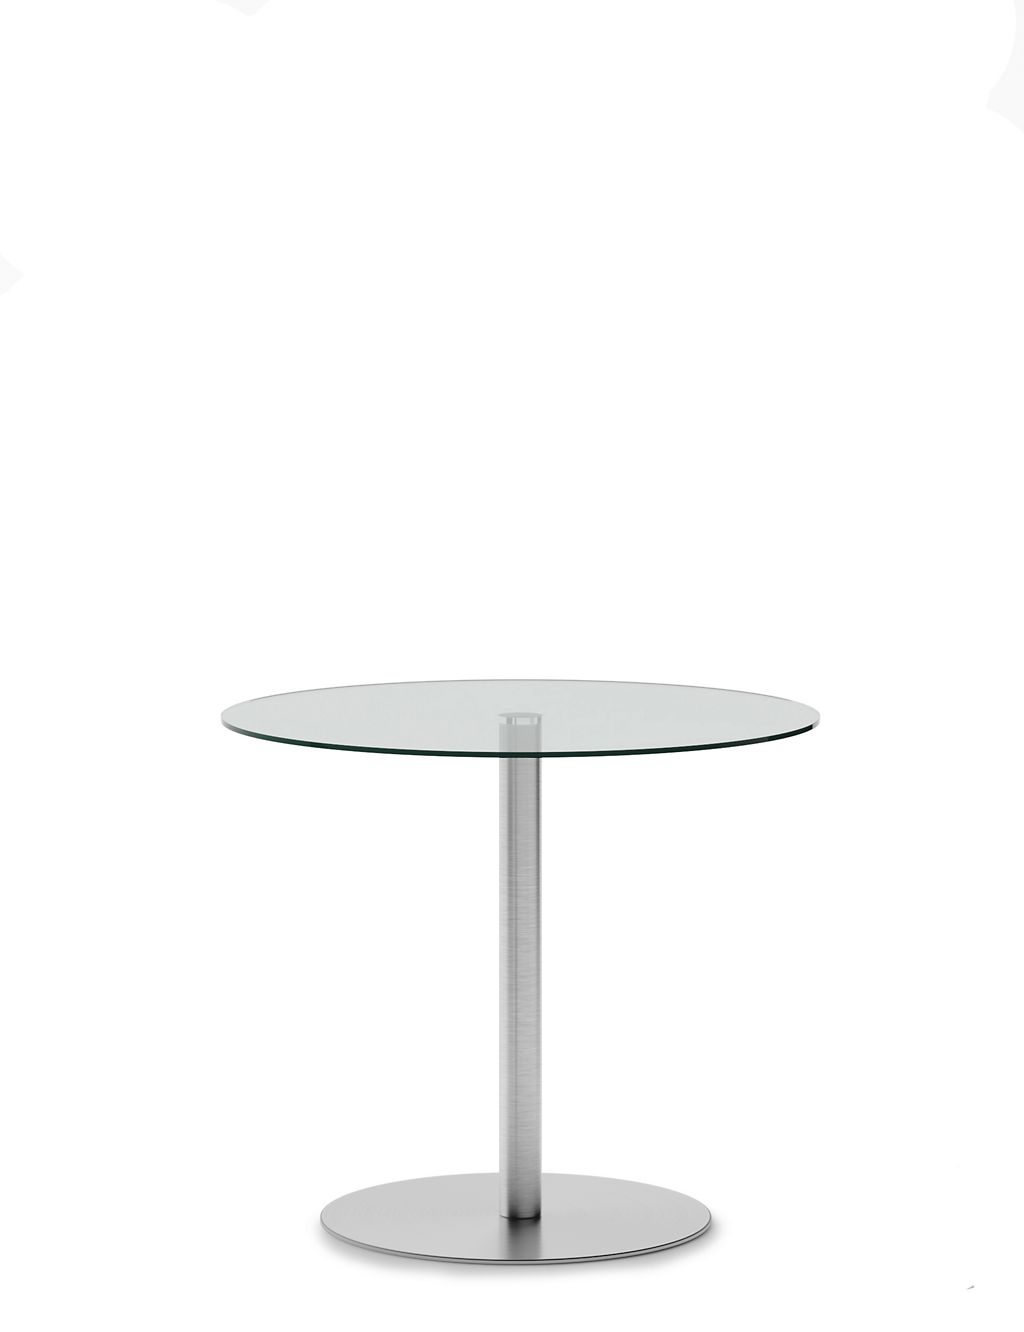 Huxley 4 Seater Pedestal Dining Table 1 of 8